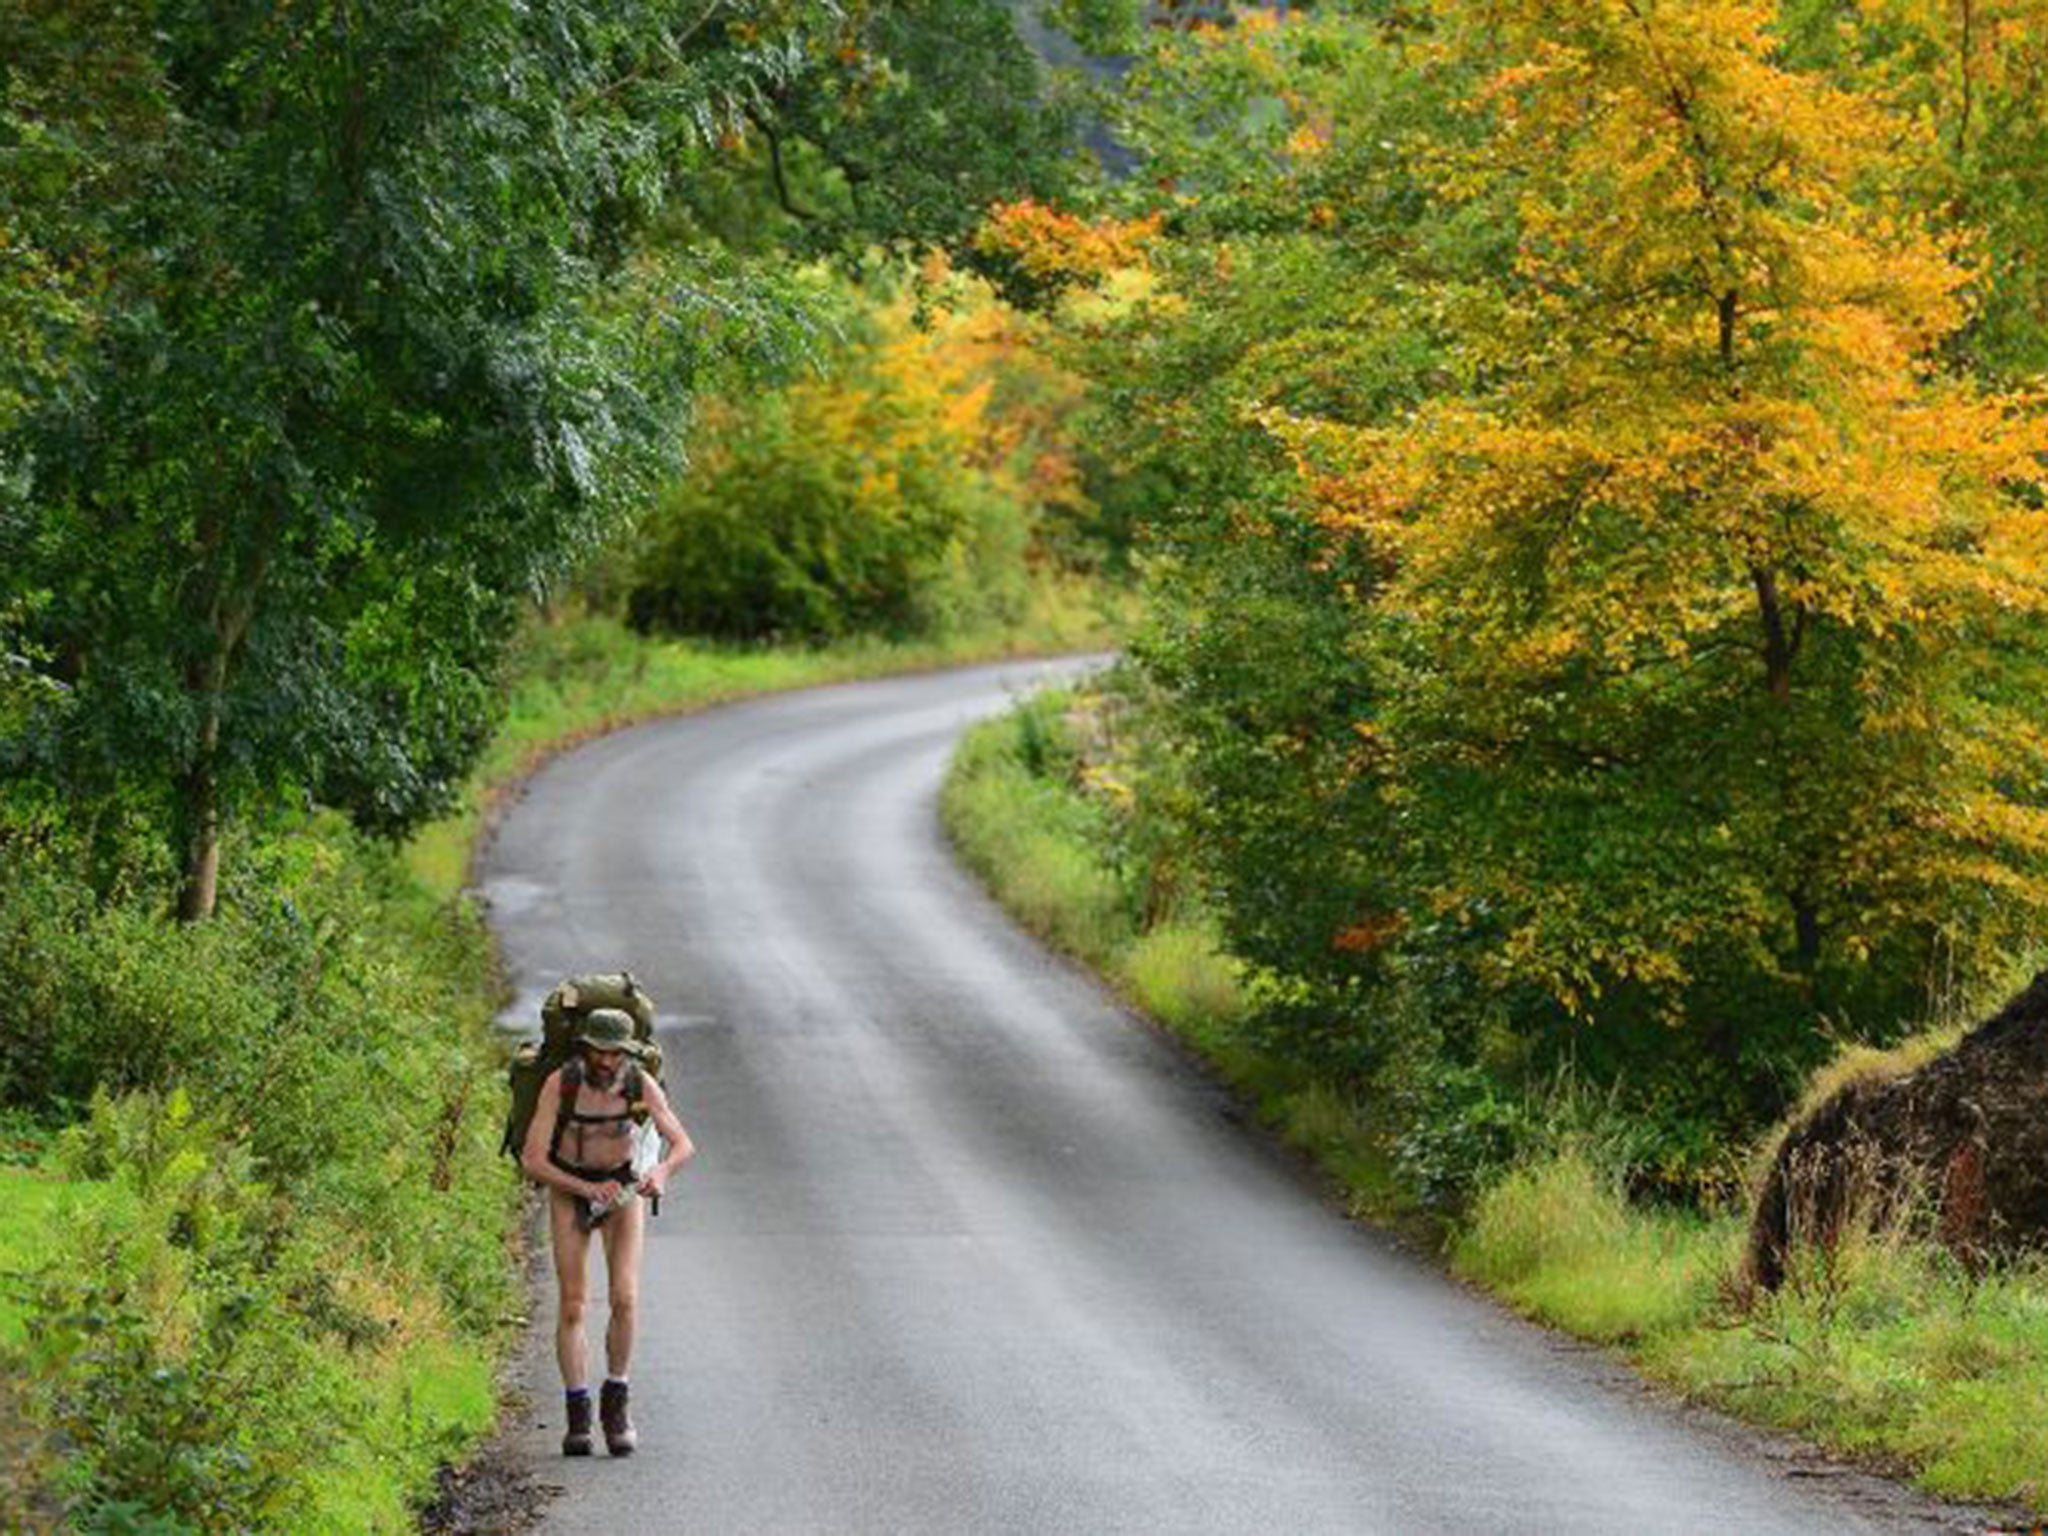 Stephen Gough on a naked ramble in Scotland after his release in 2012 